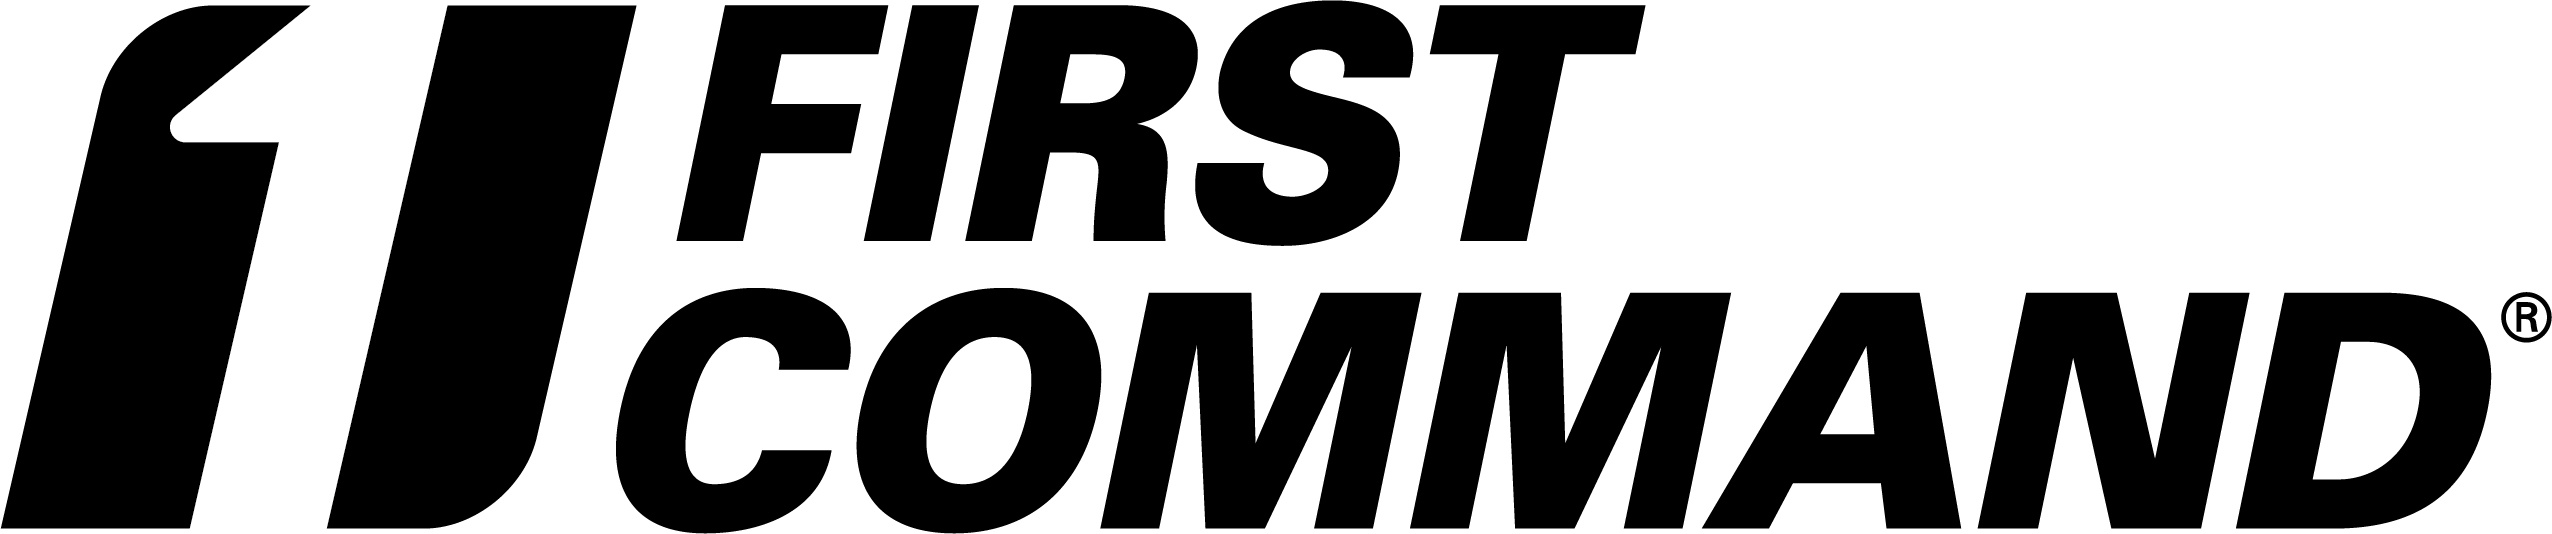 1st Logo - First Command Branding Guidelines | First Command